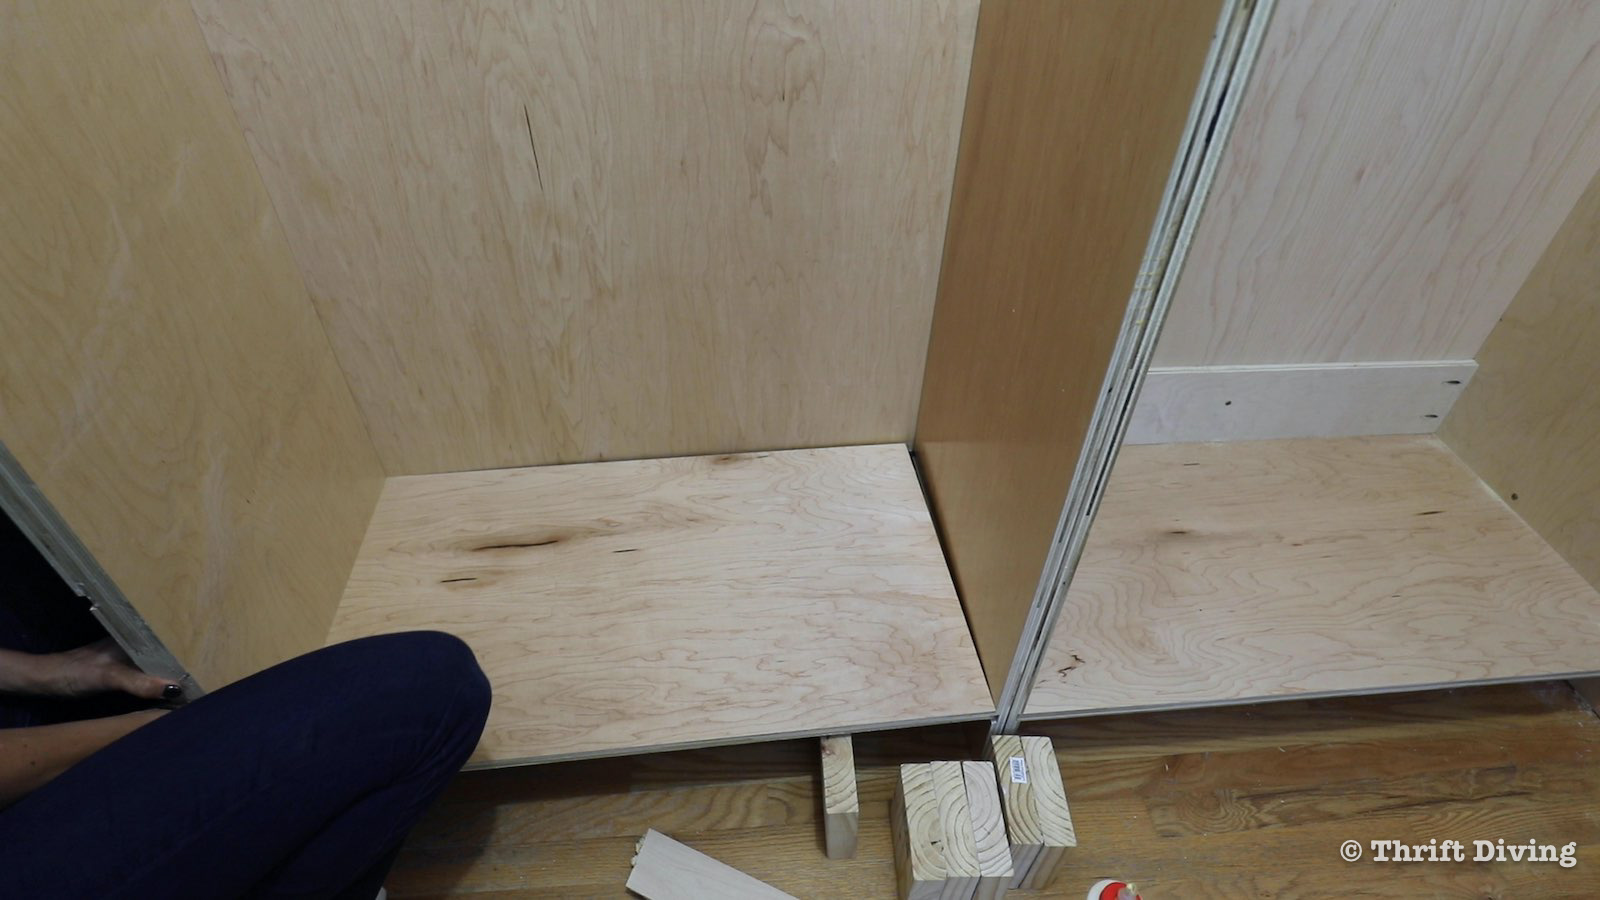 How to Build a Walk-in Closet Organizer From Scratch - Attach the other panels. - Thrift Diving